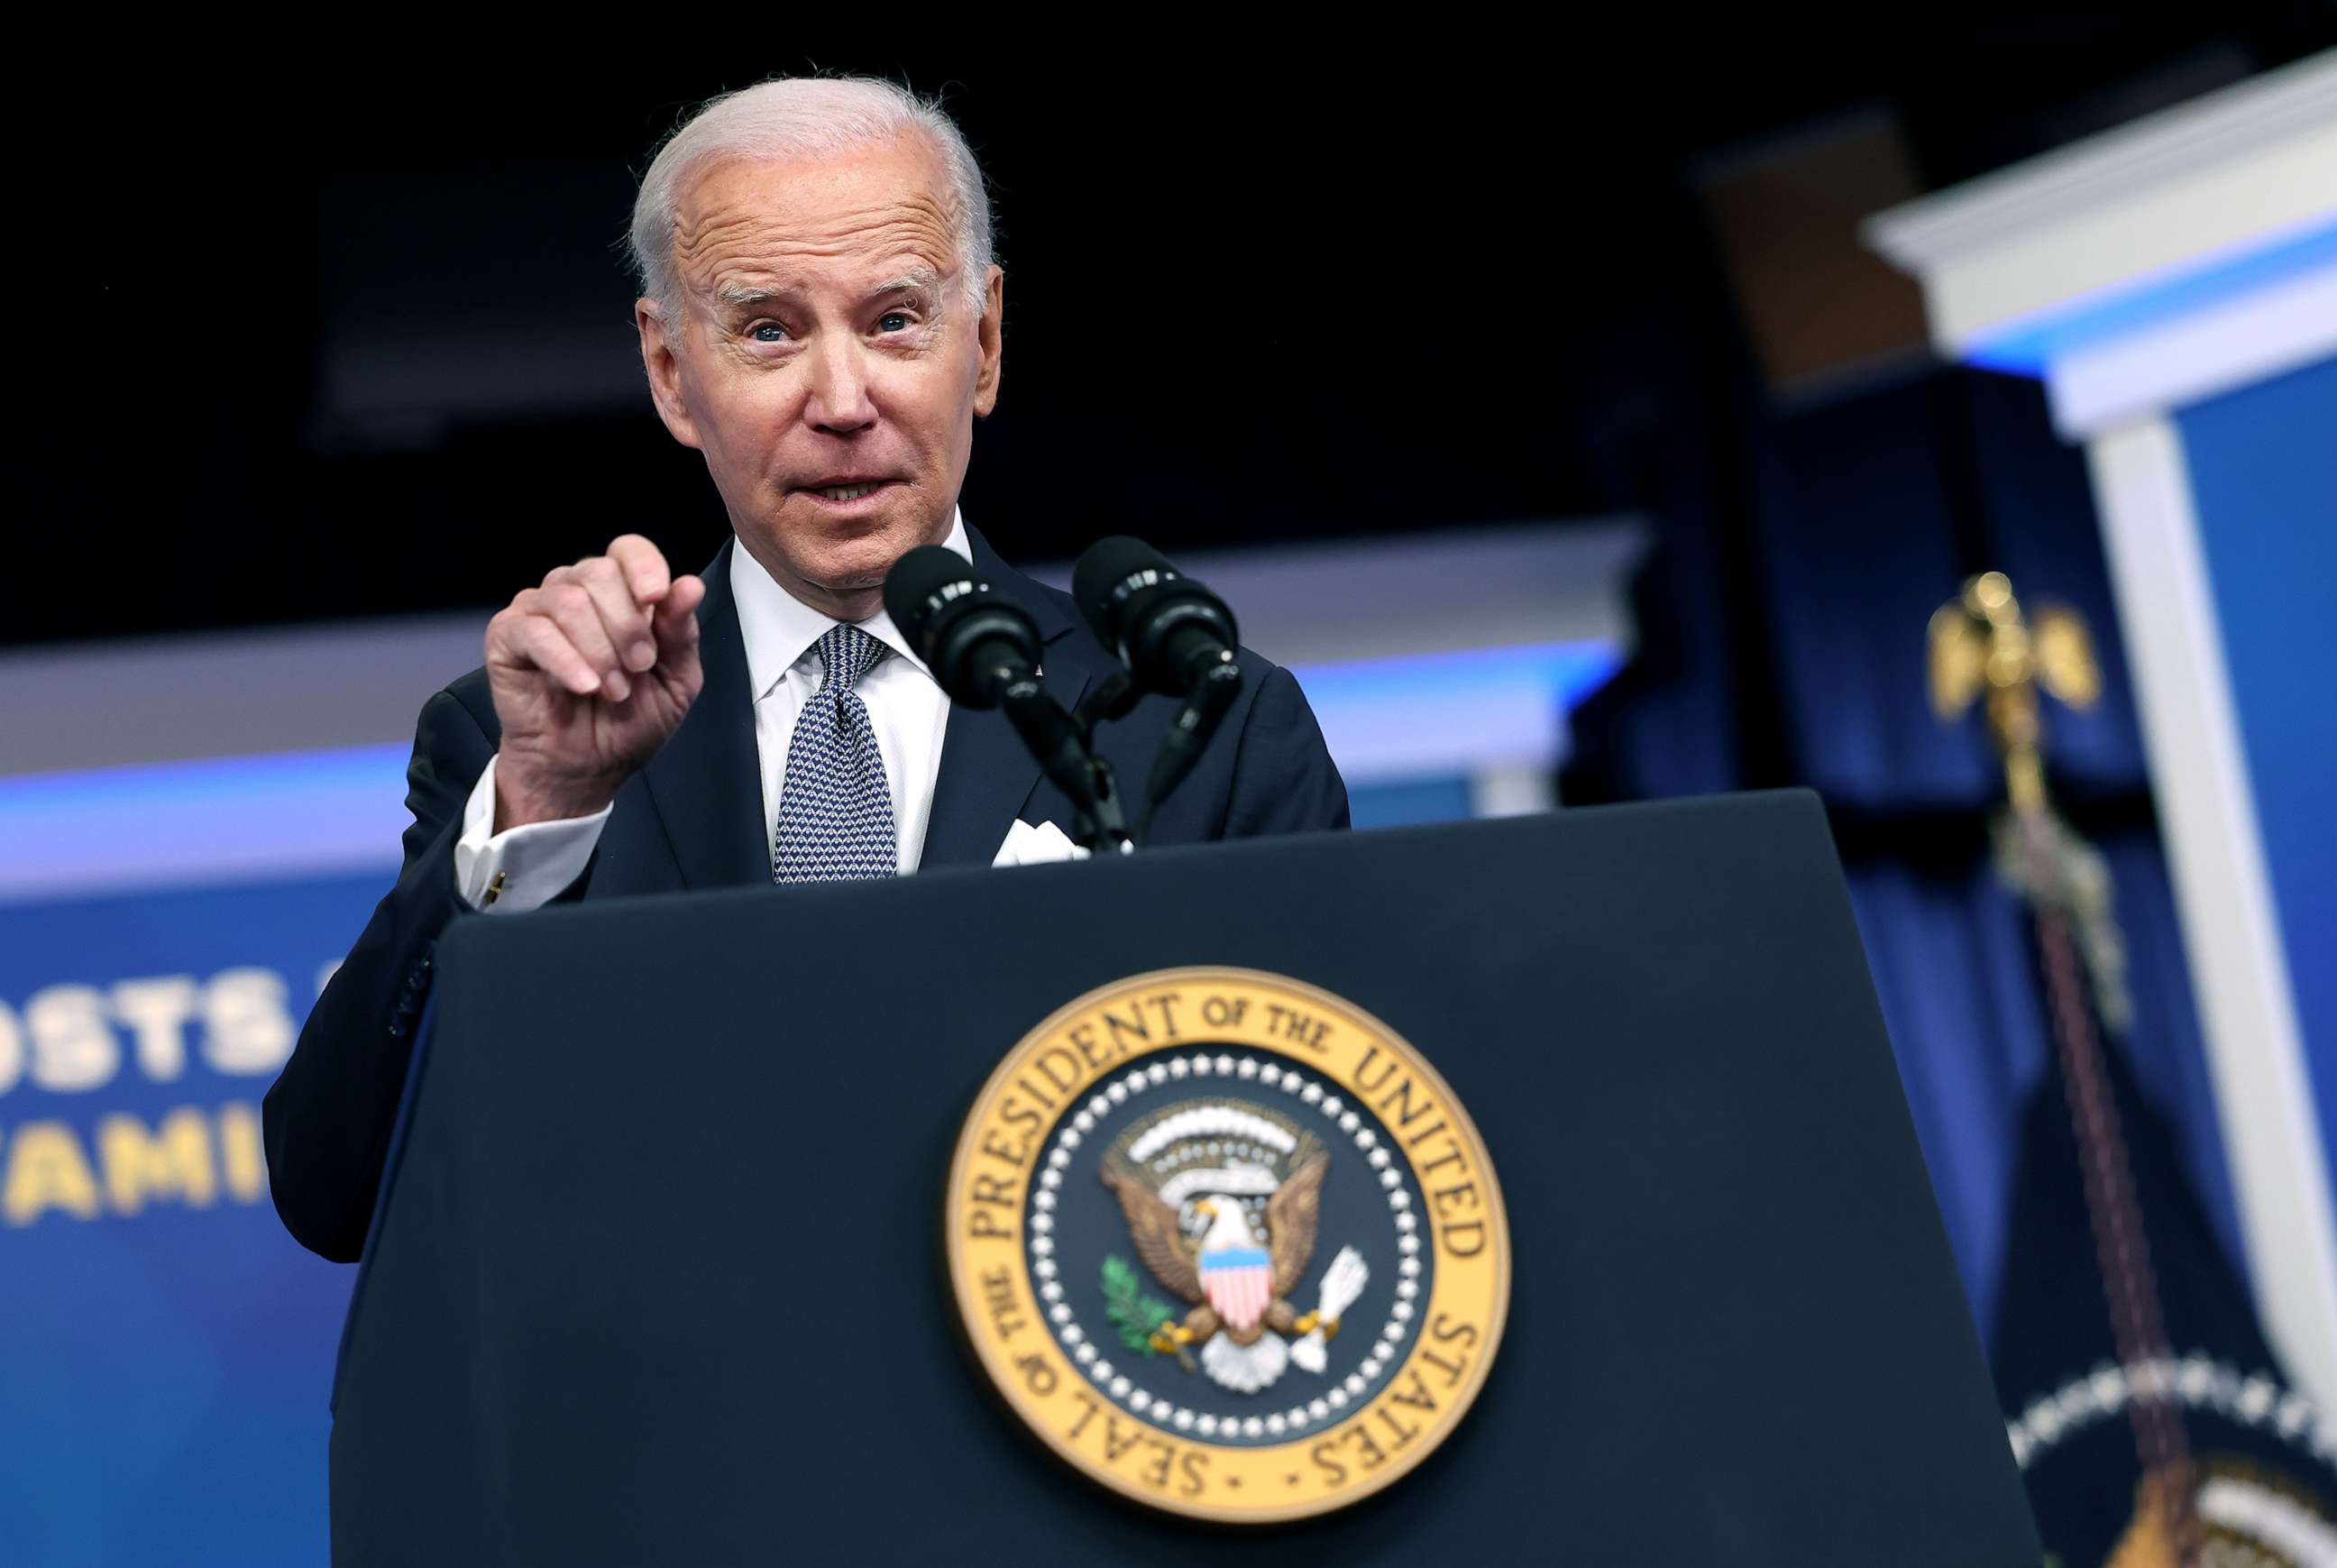 PHOTO: President Joe Biden takes questions from reporters on classified documents as he delivers remarks on the economy and inflation, Jan. 12, 2023, in Washington, D.C.